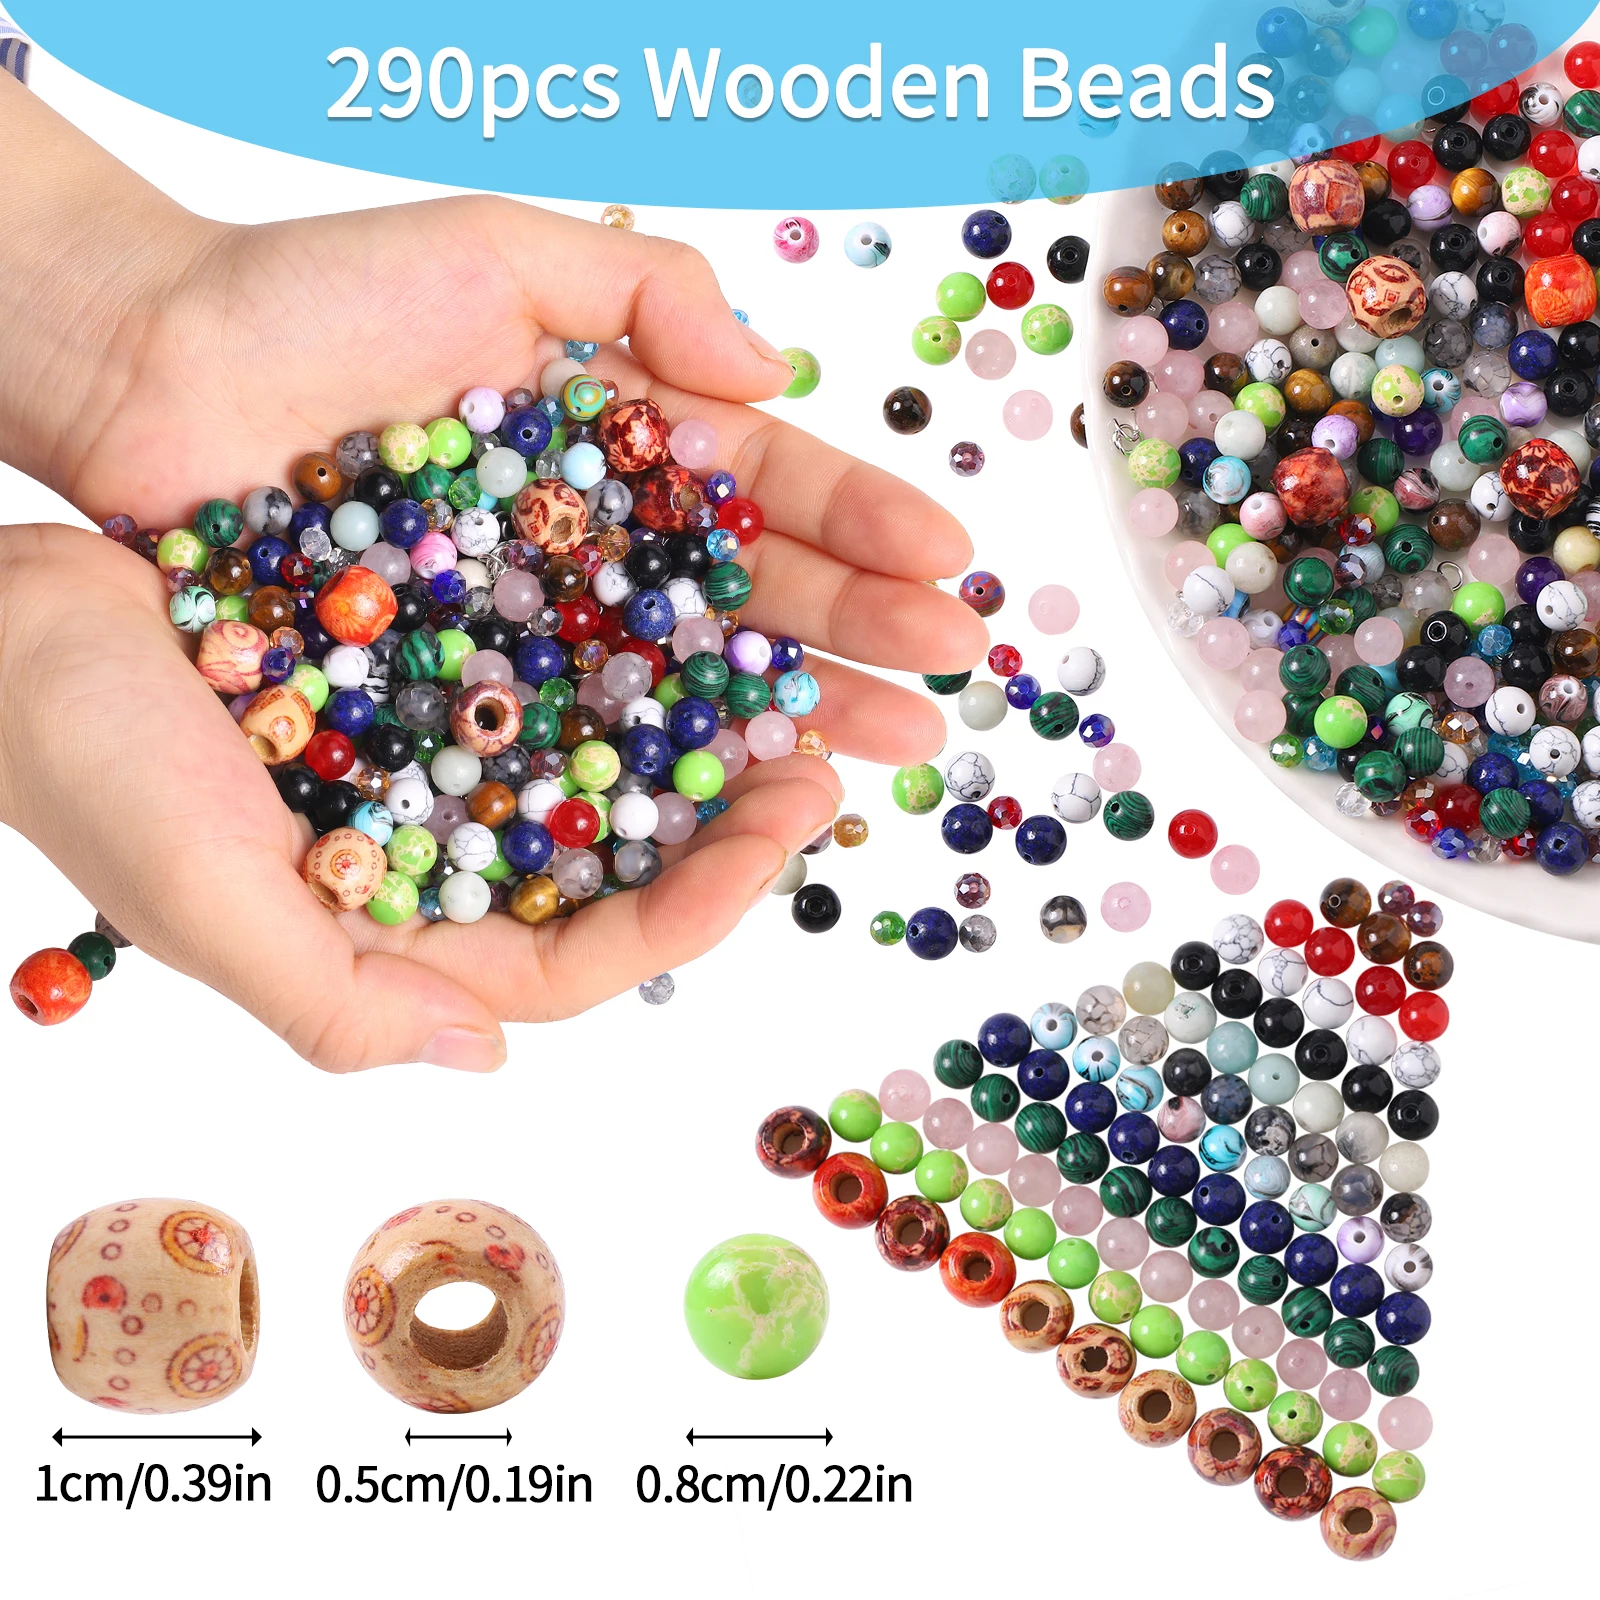 290pcs Wood Handmade DIY Mixed Alphabet Letter Beads send tools Charms Beads for Making Jewelry Handmade Bracelets Accessories 1pcs craft diy transparent uv resin liquid silicone mold rectangle bookmarks resin molds for diy pendant charms making jewelry